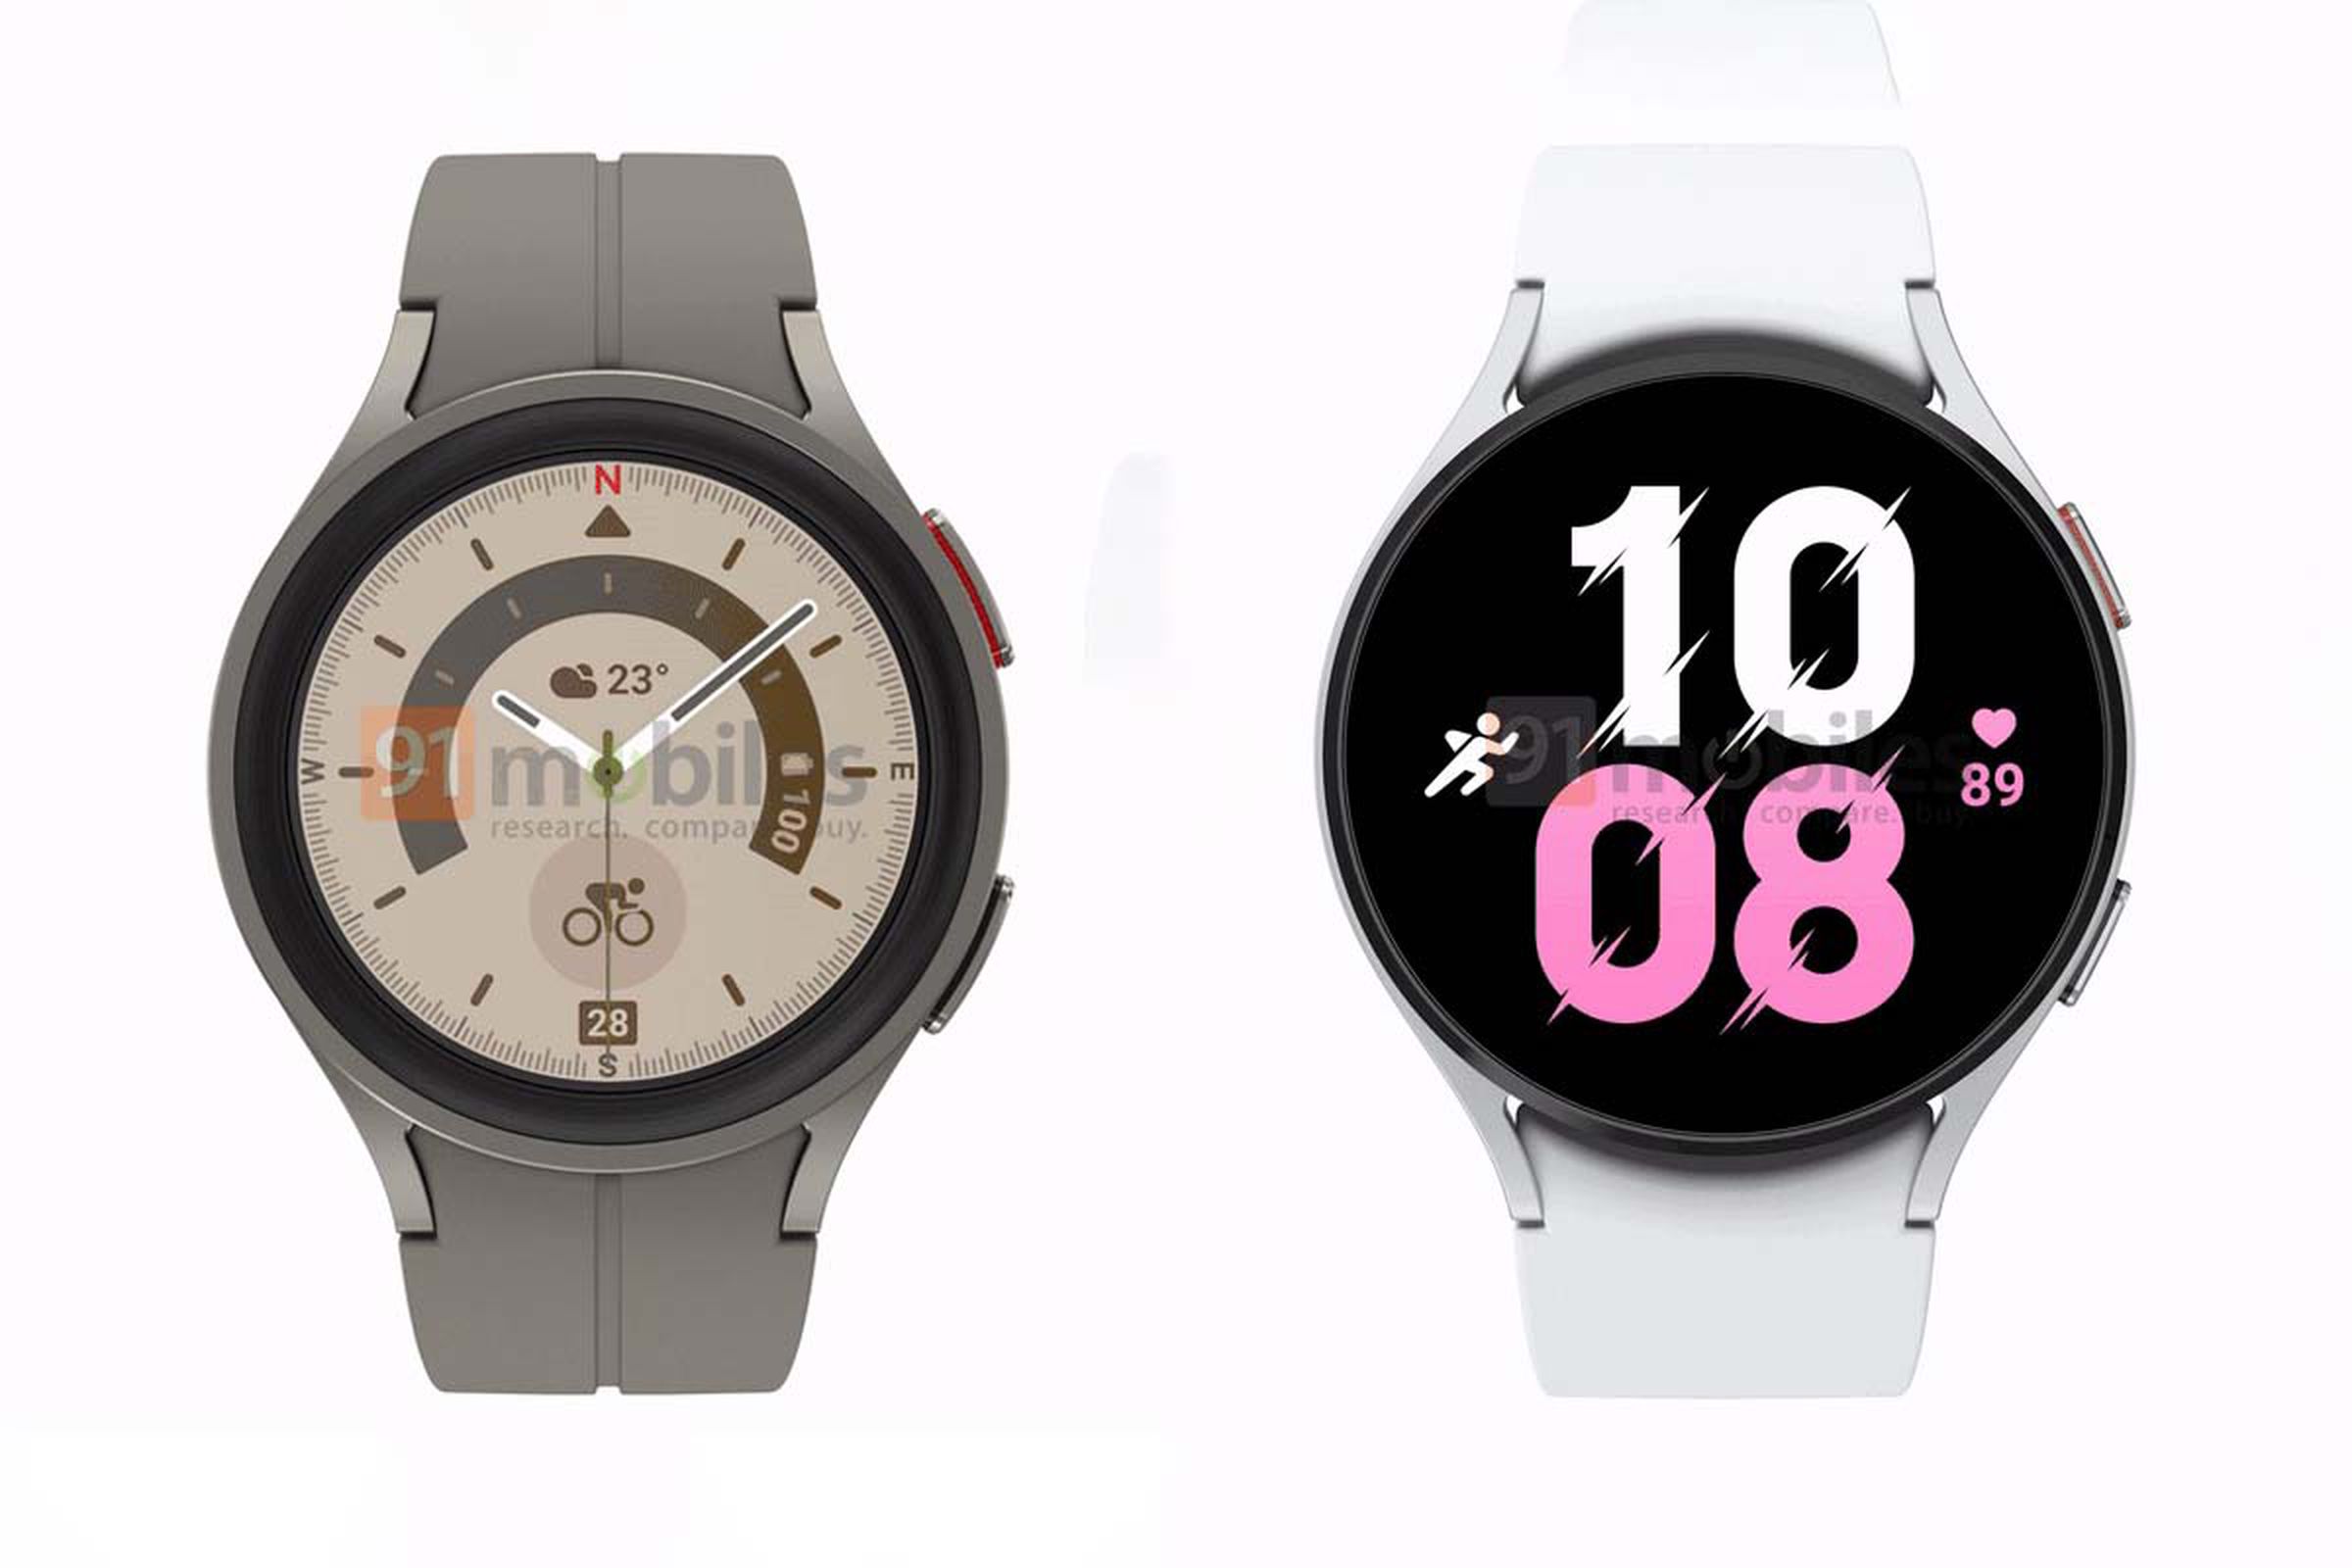 The Galaxy Watch 5 Pro (left) and the Galaxy Watch 5 (right).